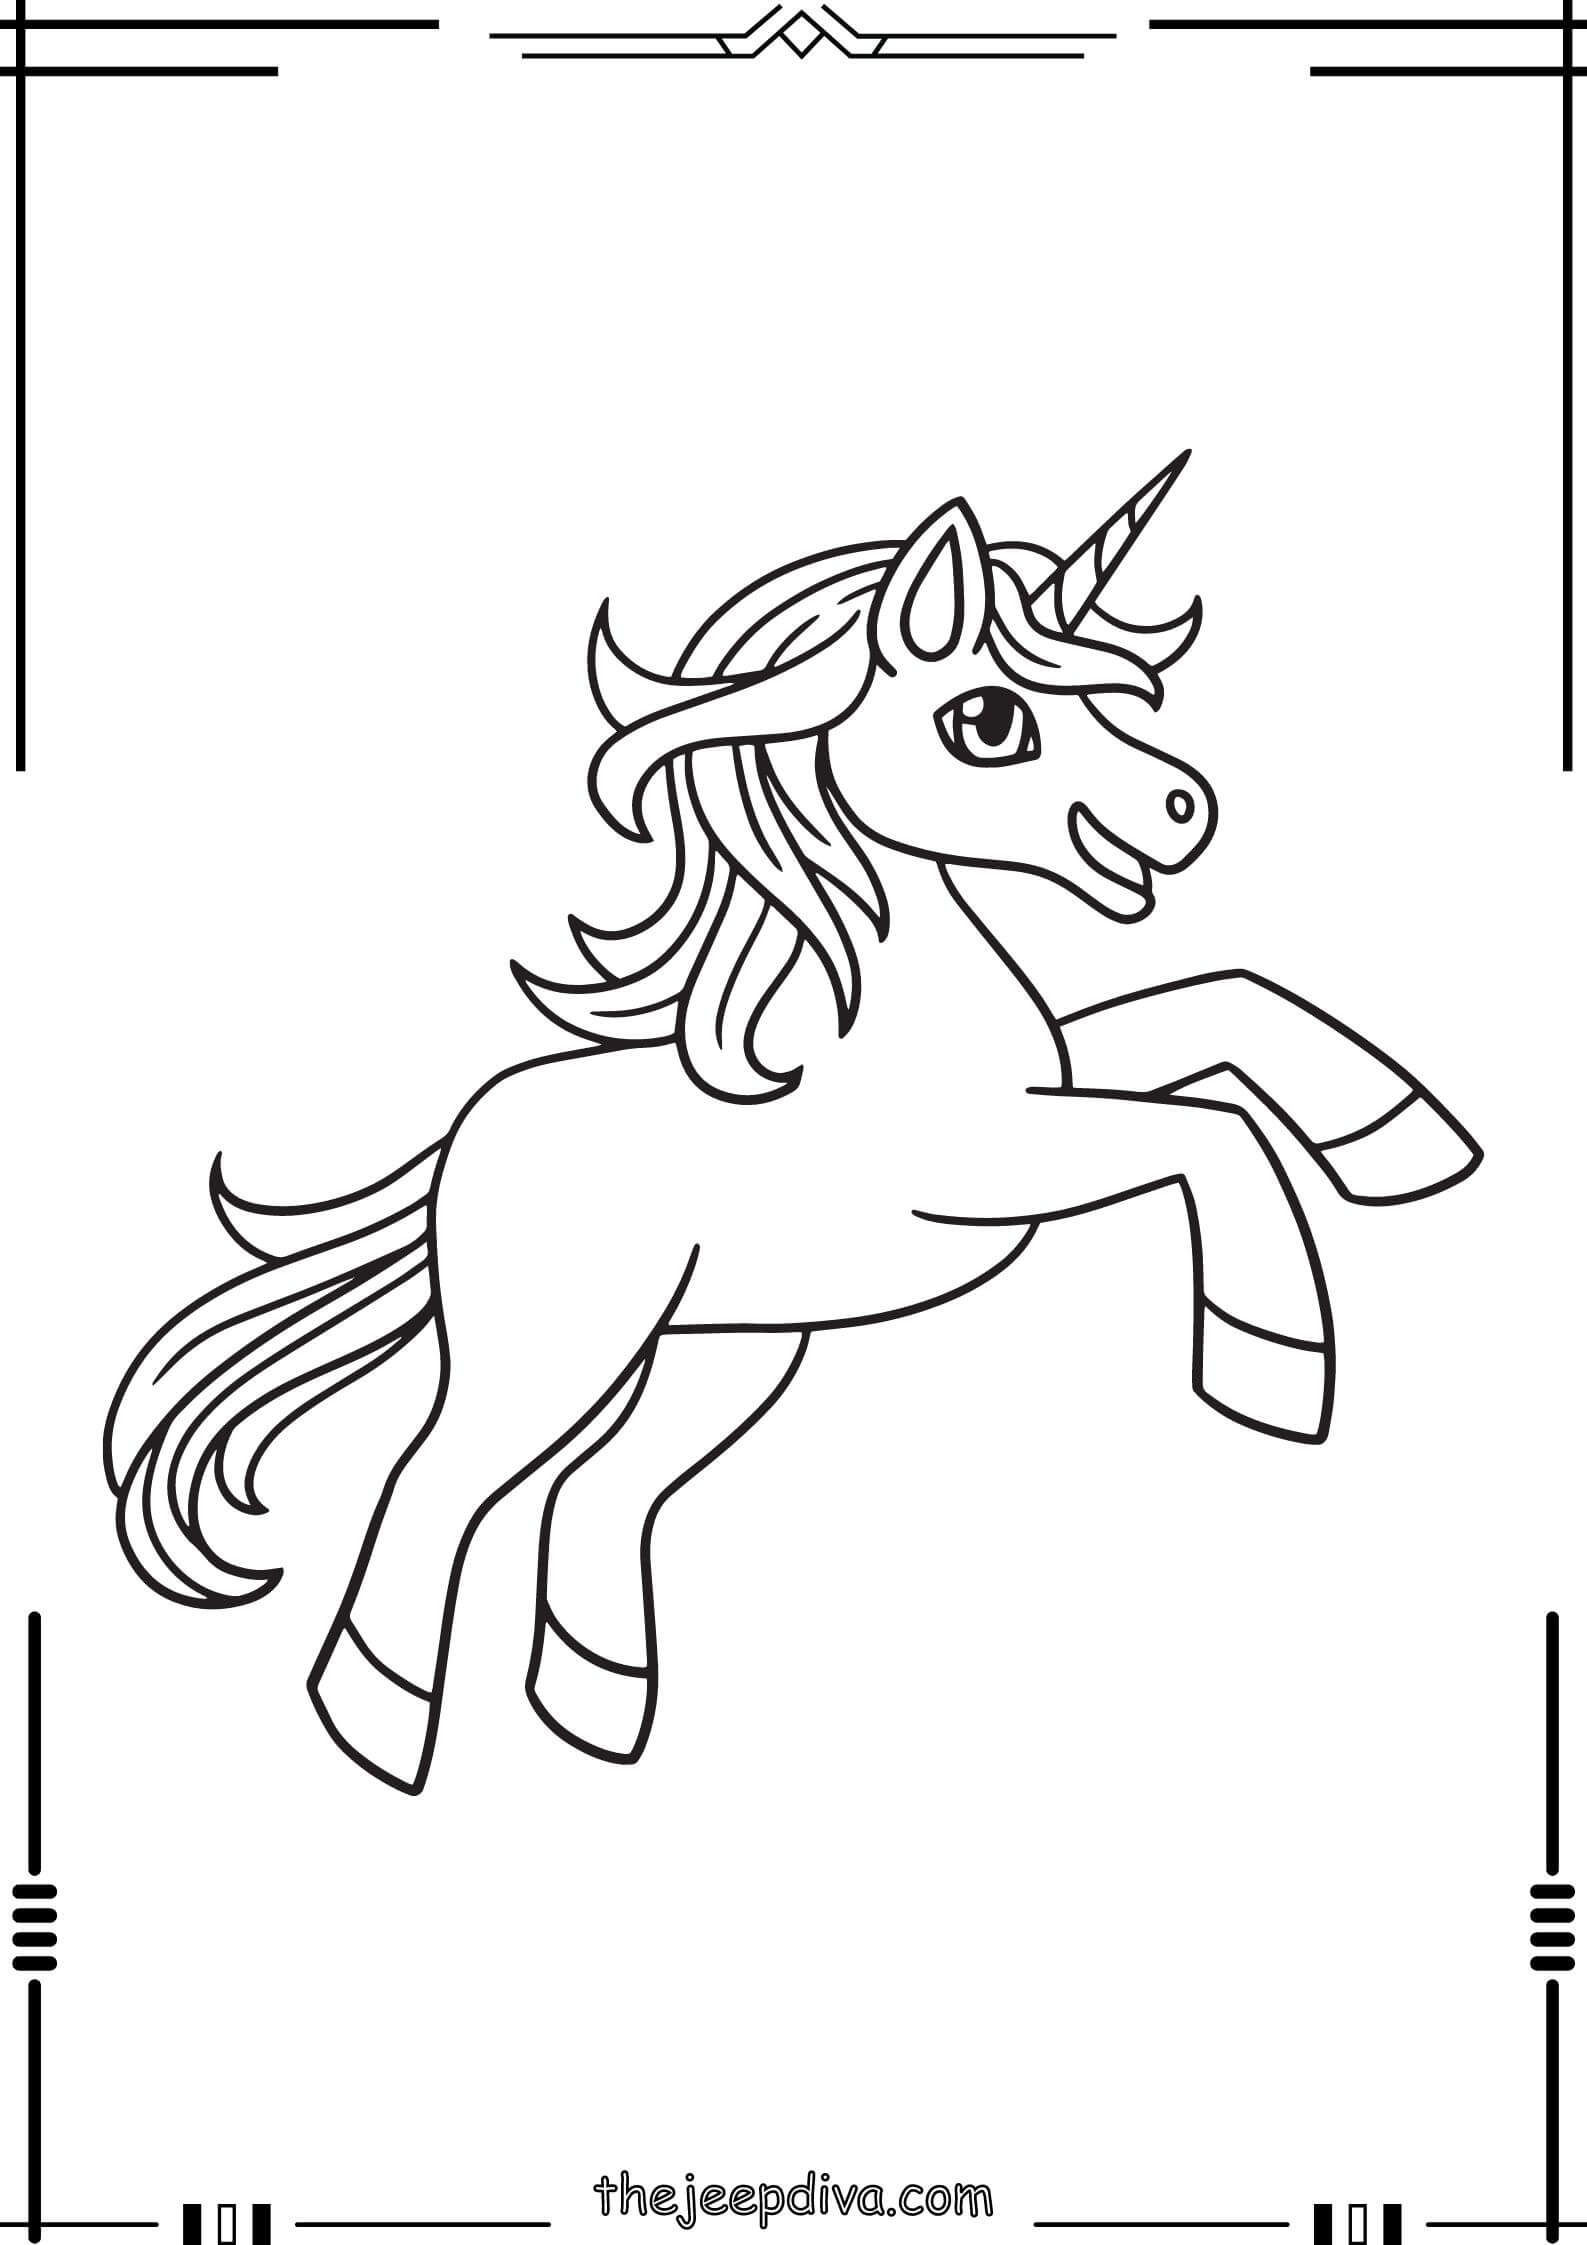 unicorn-coloring-page-easy-7